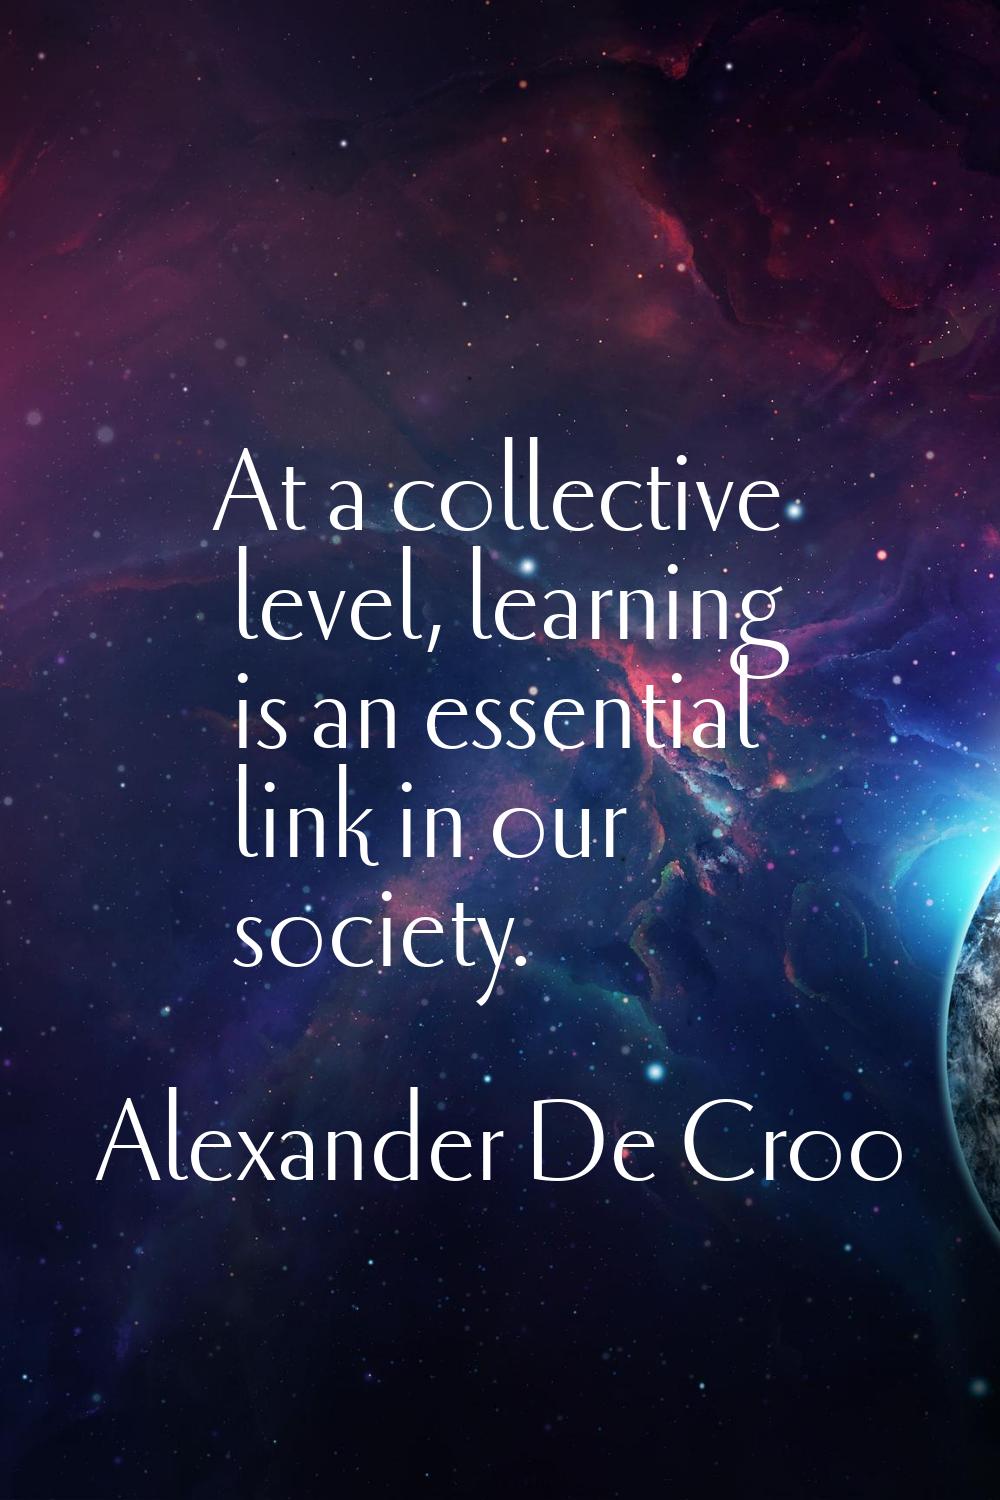 At a collective level, learning is an essential link in our society.